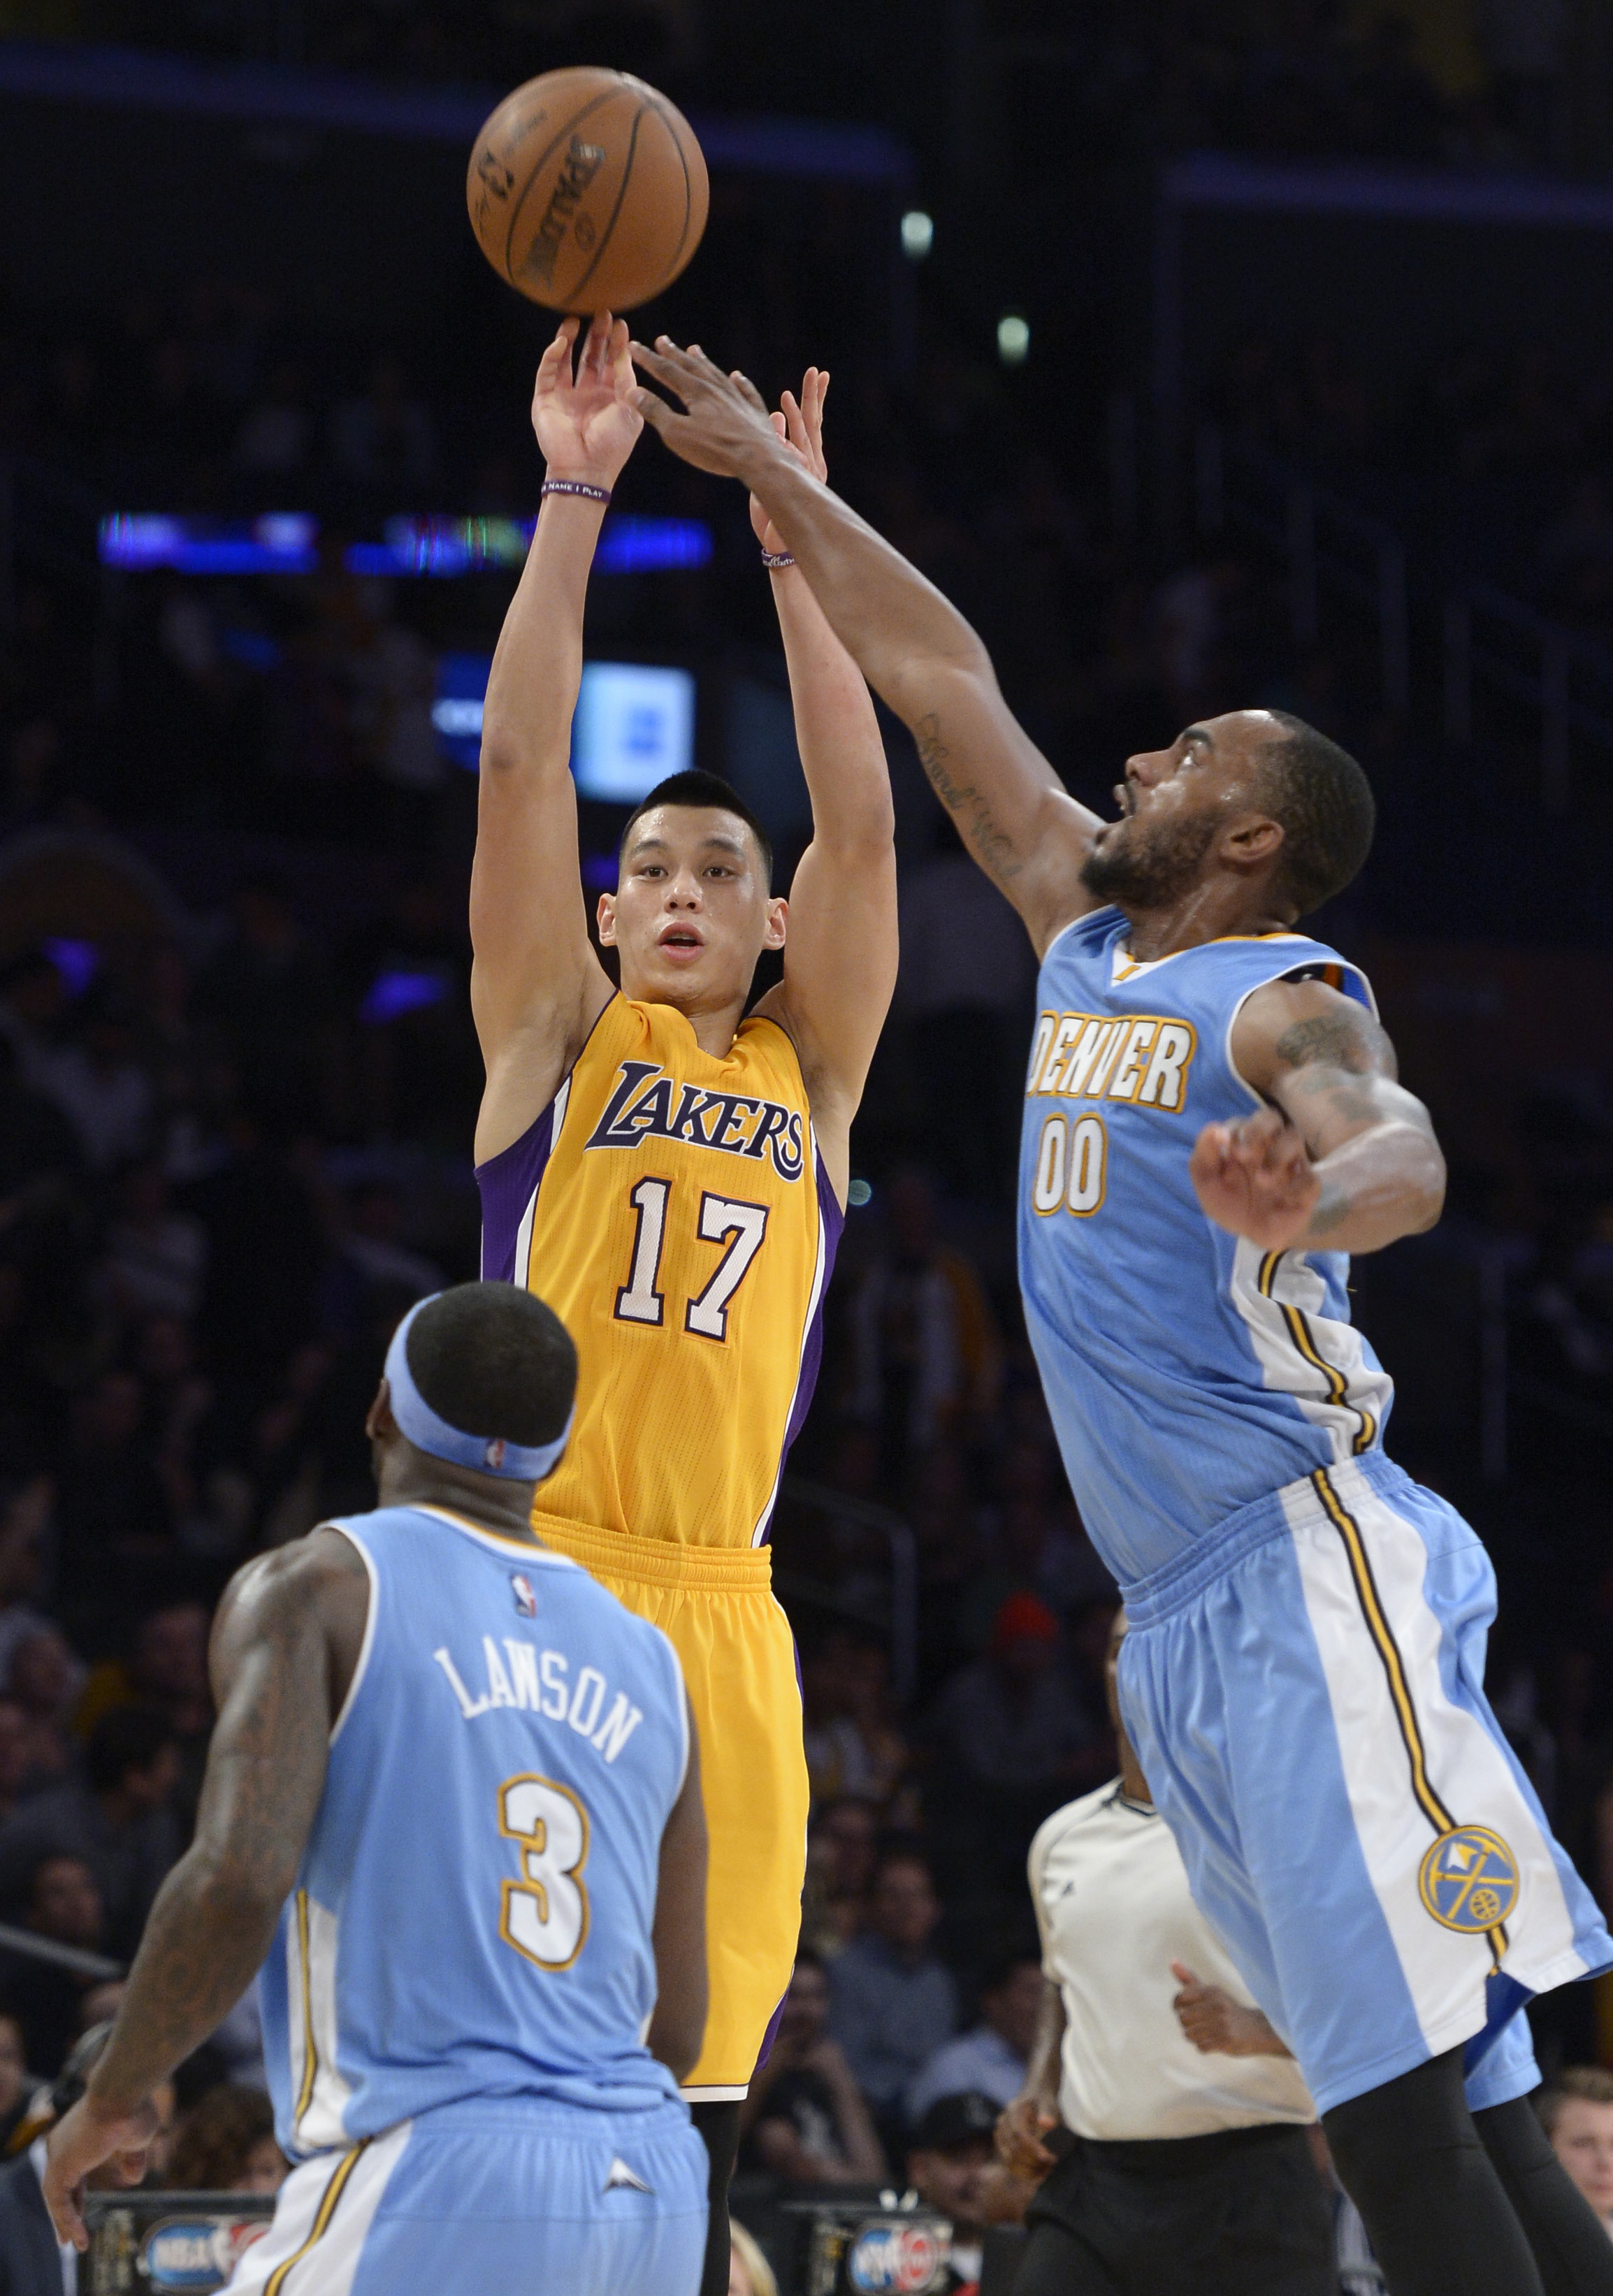 Lakers#17 Jeremy Lin shoots, but can not hit a 3-pointer against Nuggets#3 Ty Lawson and Nuggets#00 Darrell Arthur in the 4th quarter. The Denver Nuggets defeated the Los Angeles Lakers 106-96 at Staples Center in Los Angeles, CA February 10, 2015.  (Photos by John McCoy / Los Angeles Daily News)